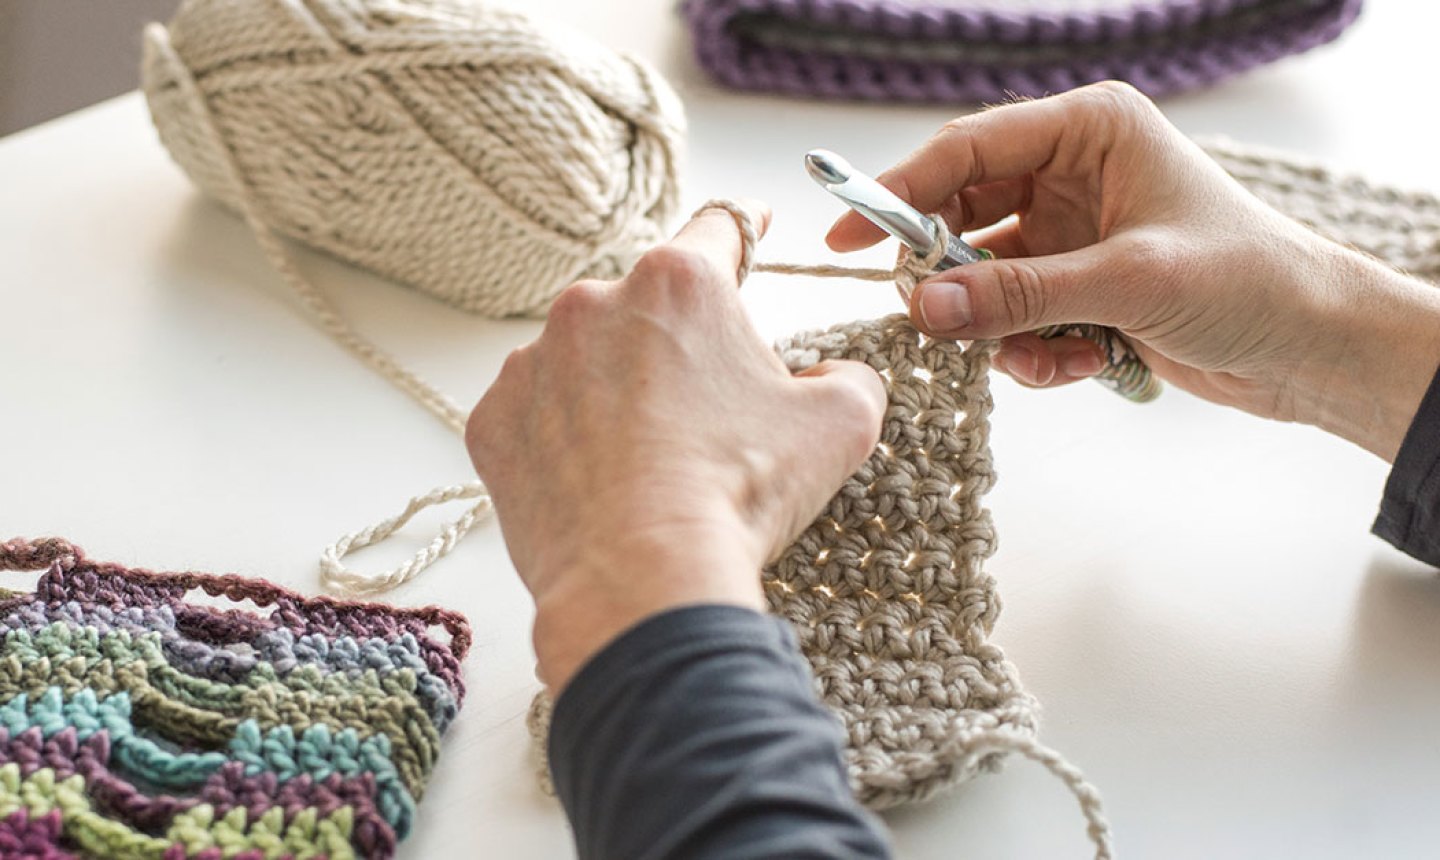 Follow along with this crochet tutorial and learn how to create